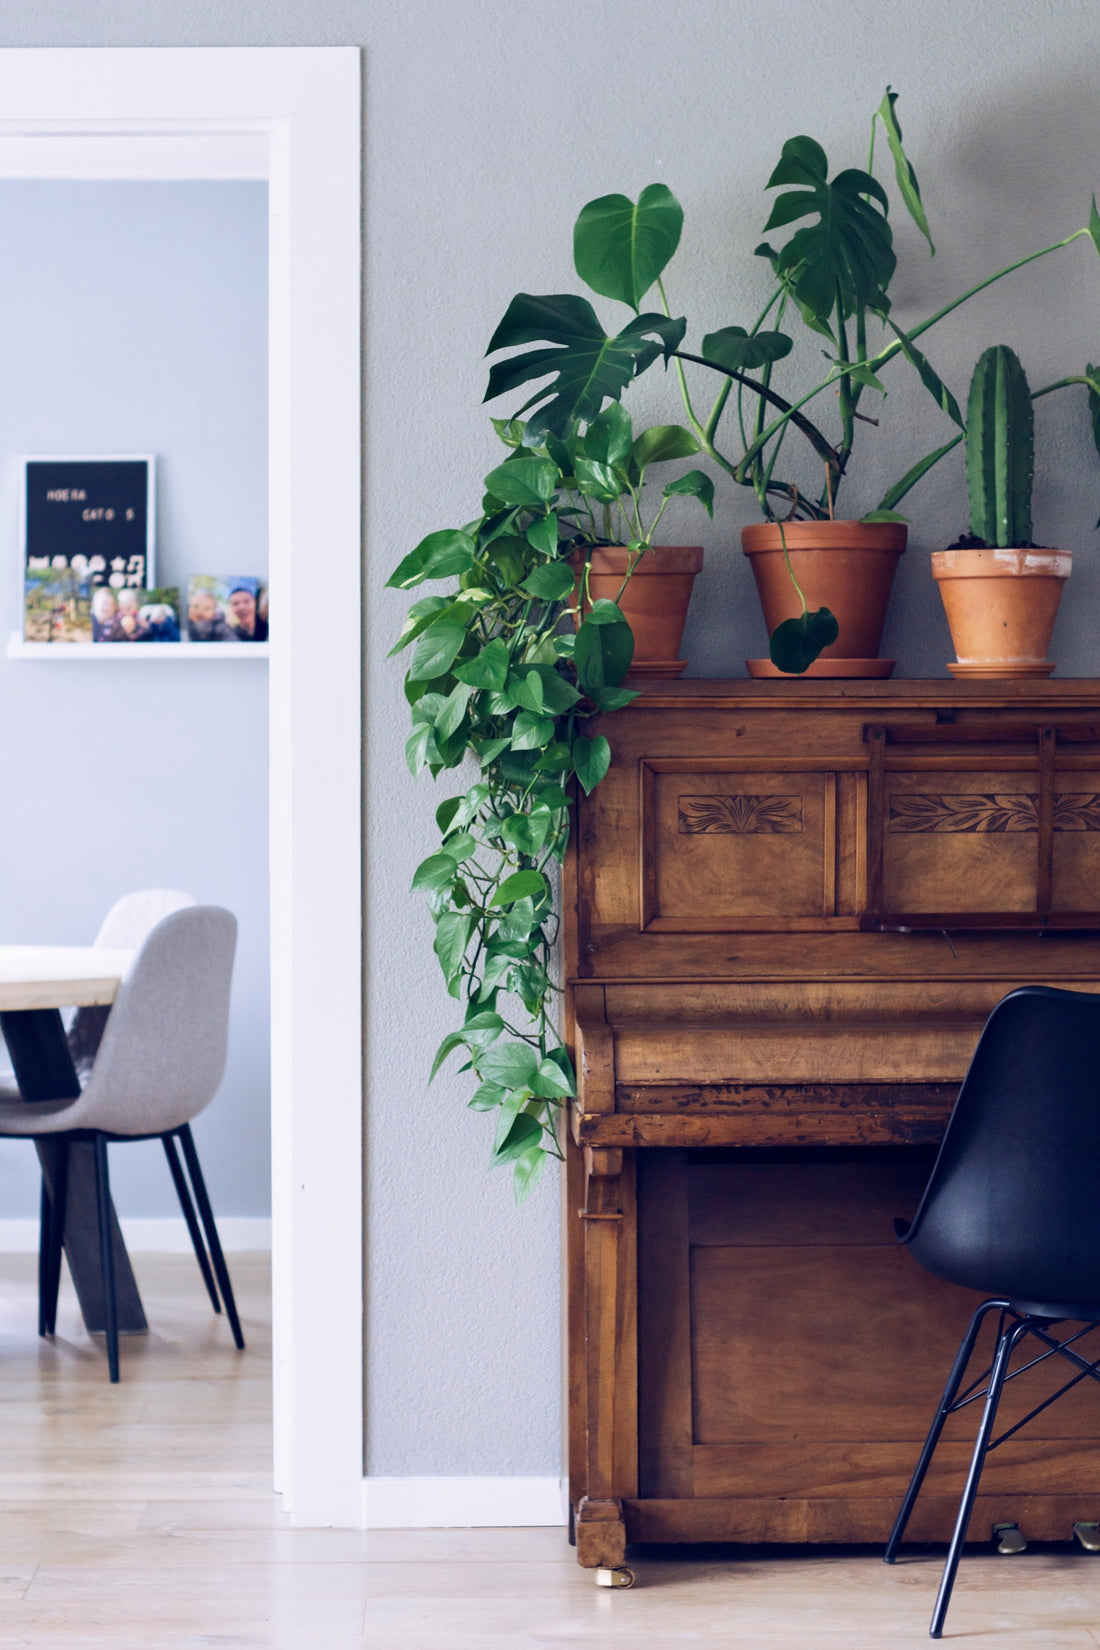 Top Benefits of Indoor Plants for Your Home or Office